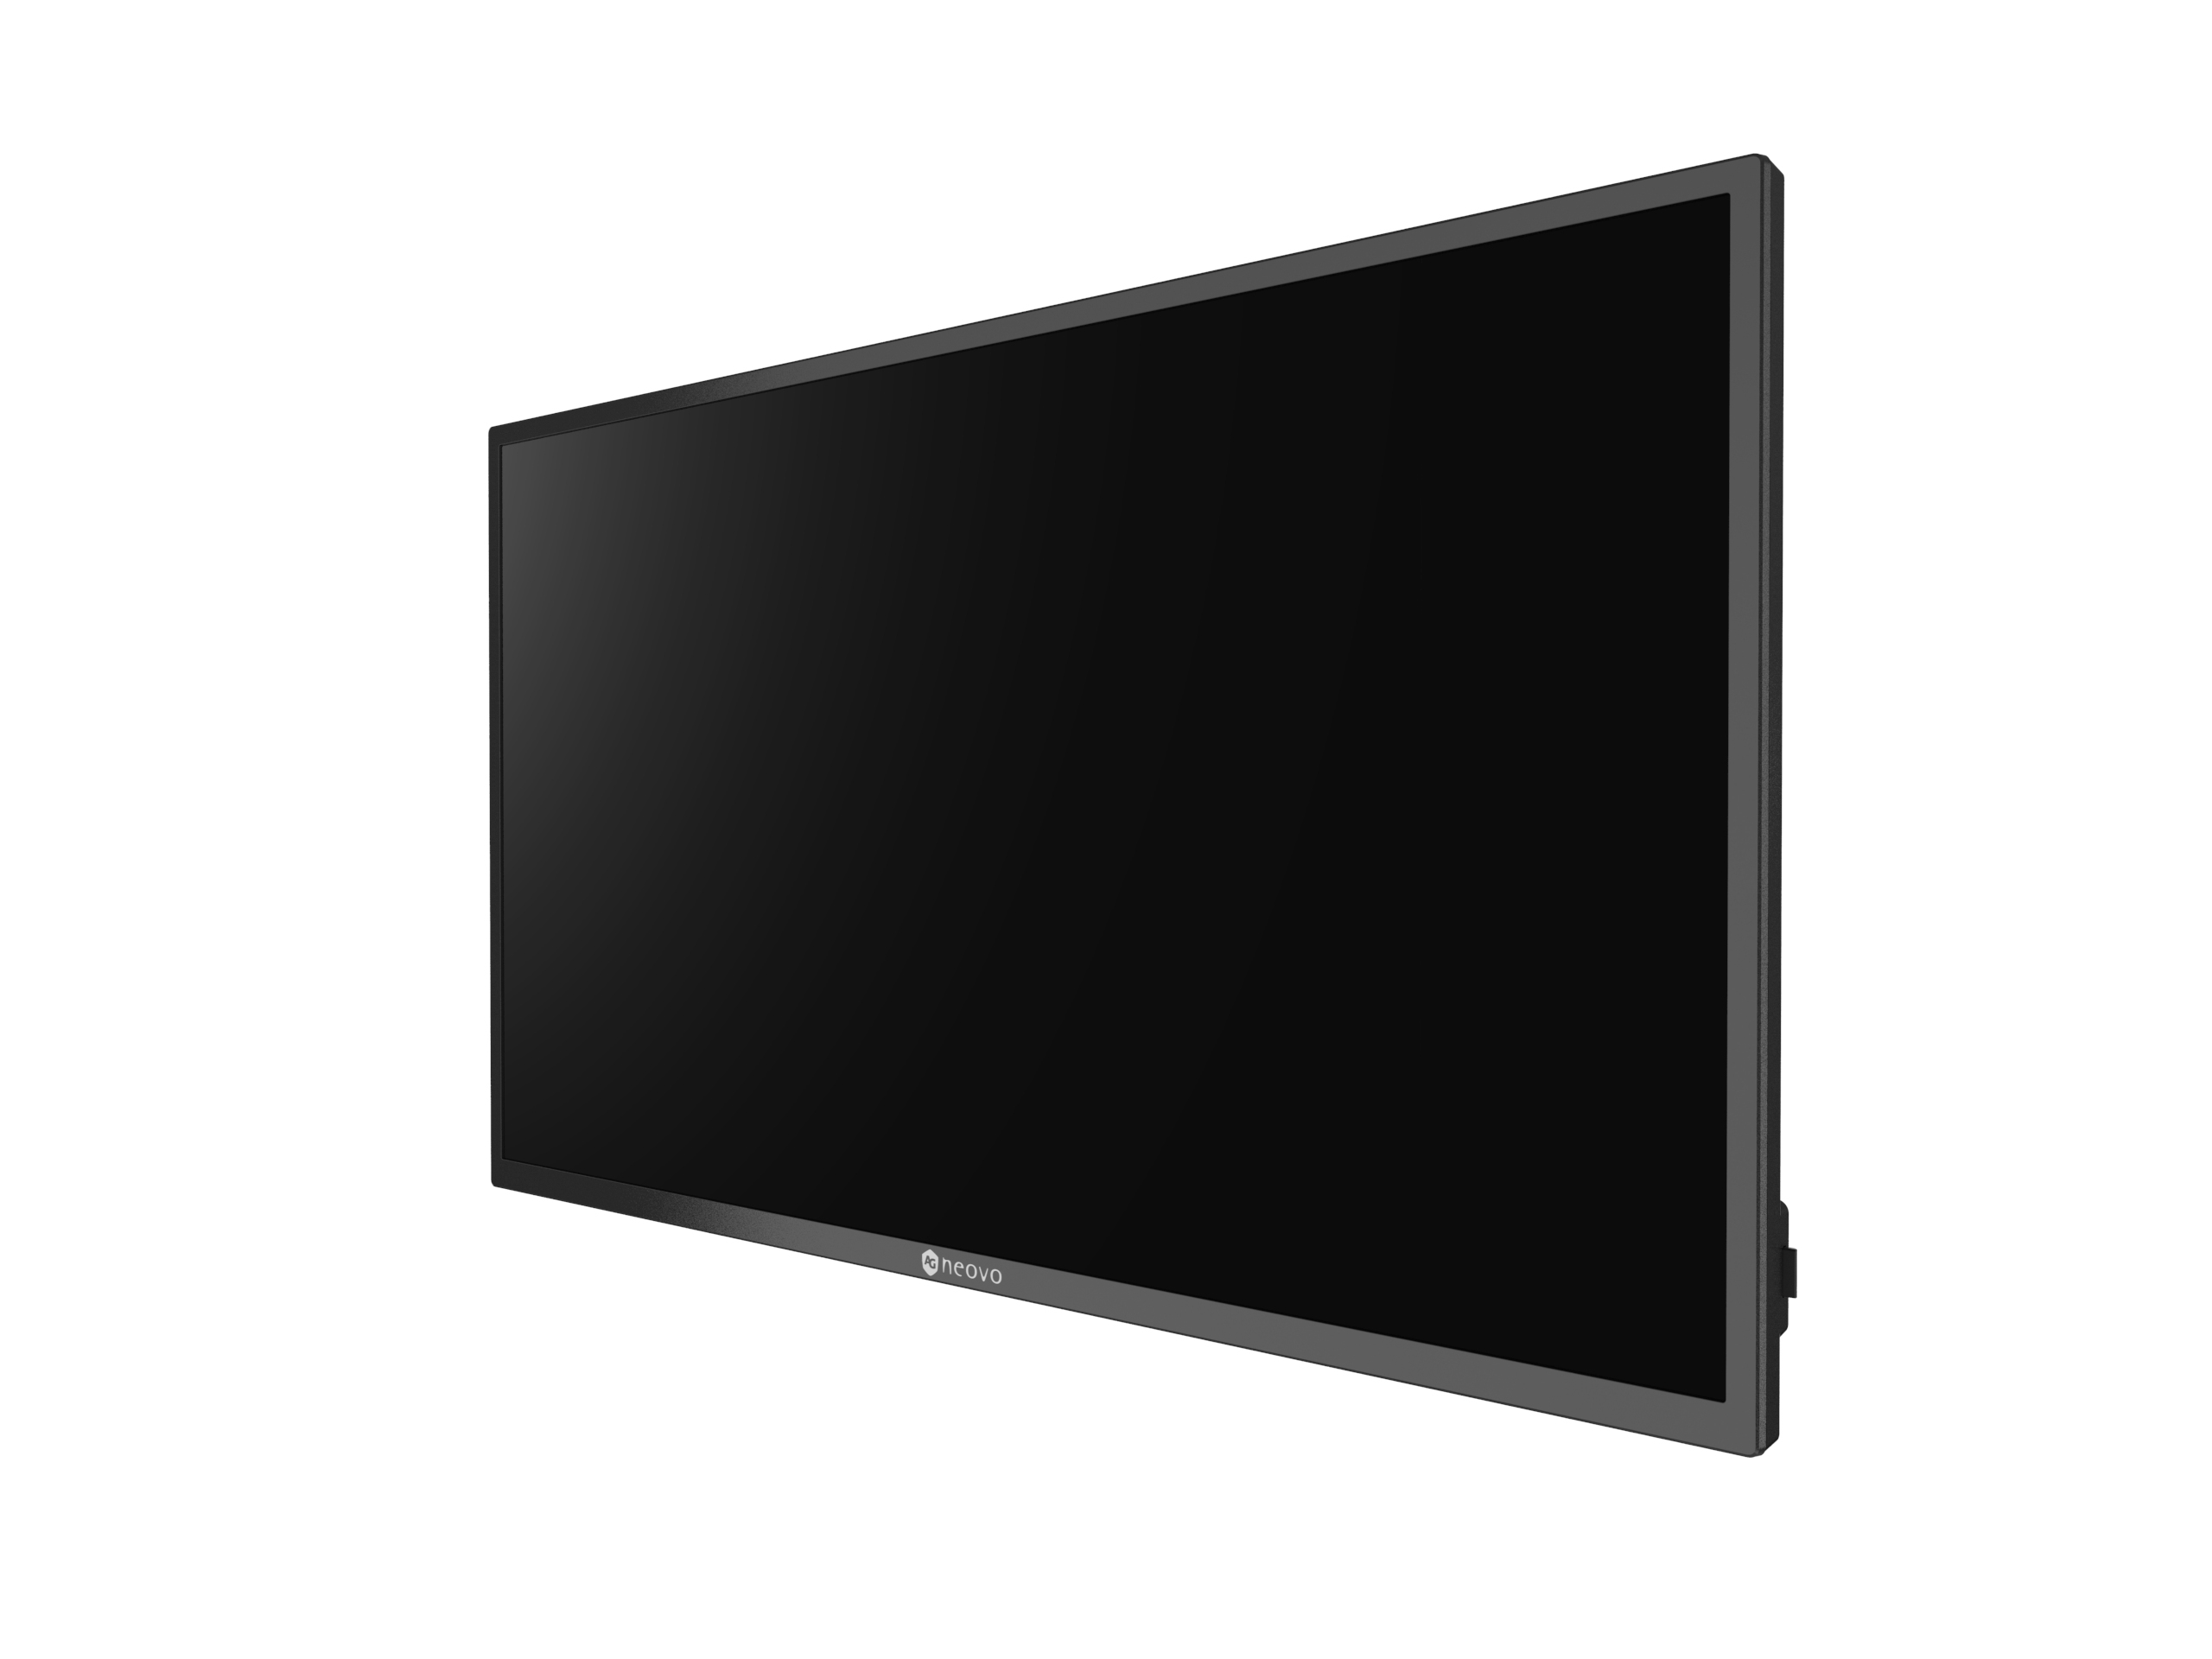 AG Neovo 32" indoor digital sinage/Video Wall 16/7 - 81,3 cm